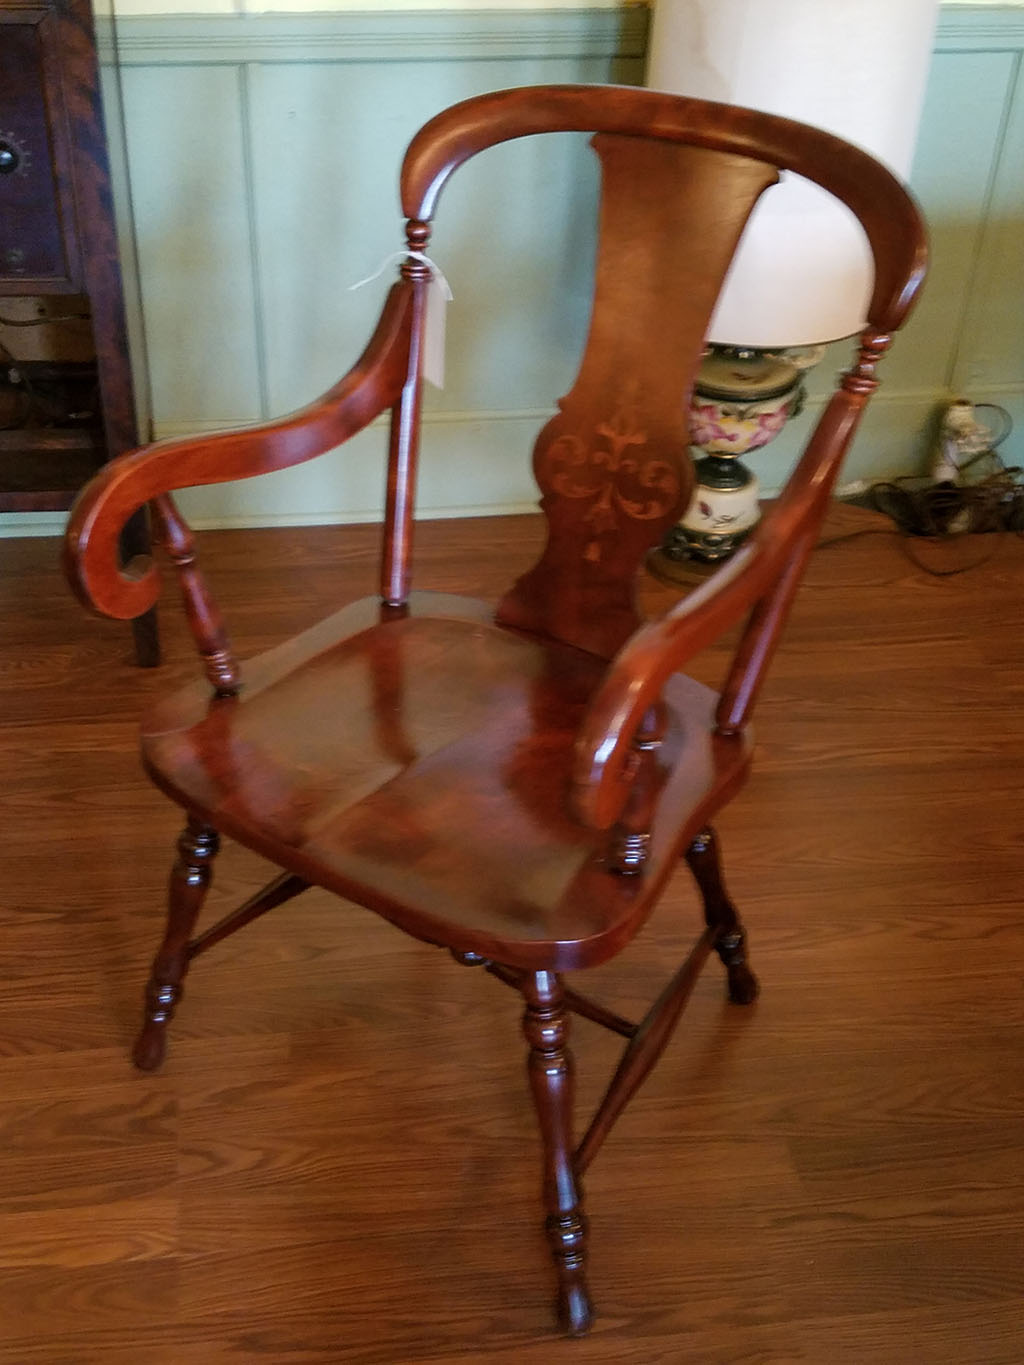 Solid Mahogany Chair - In Days of Olde